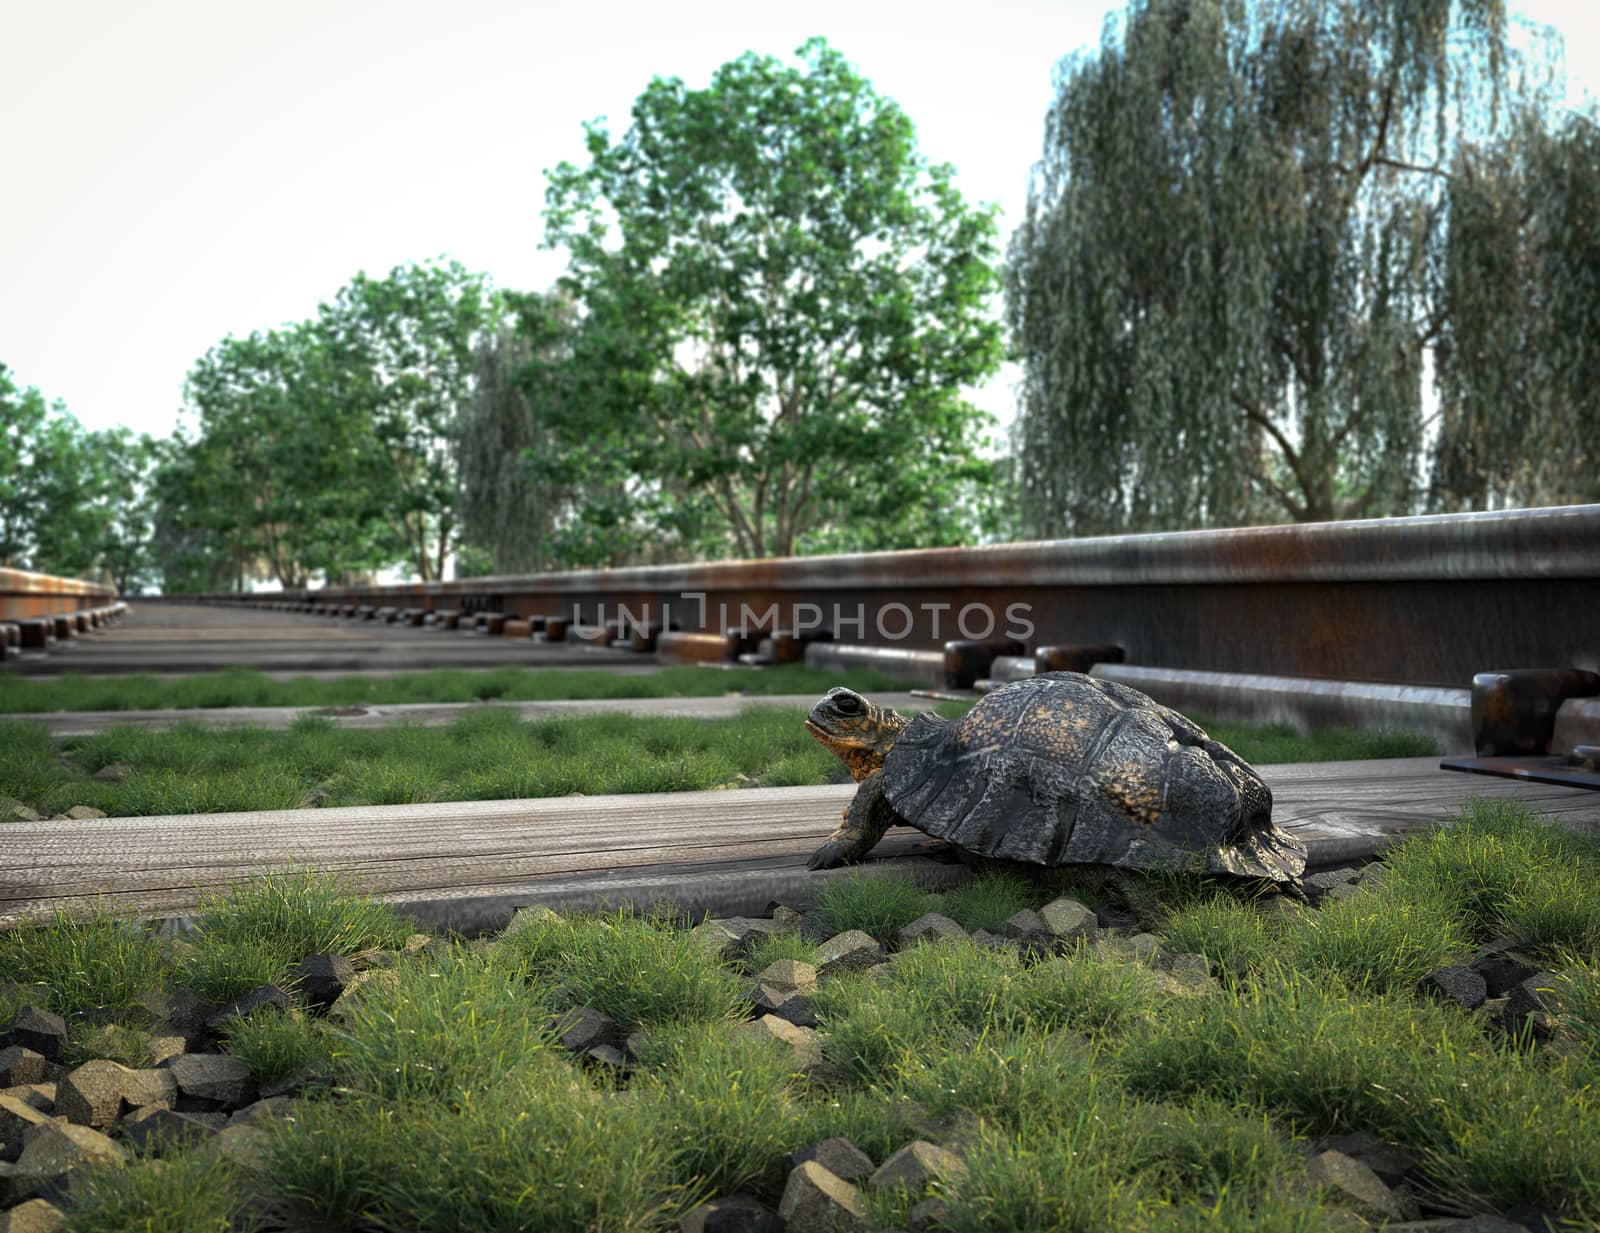 Railway track crossing rural landscape and turtle. Travel concept by denisgo